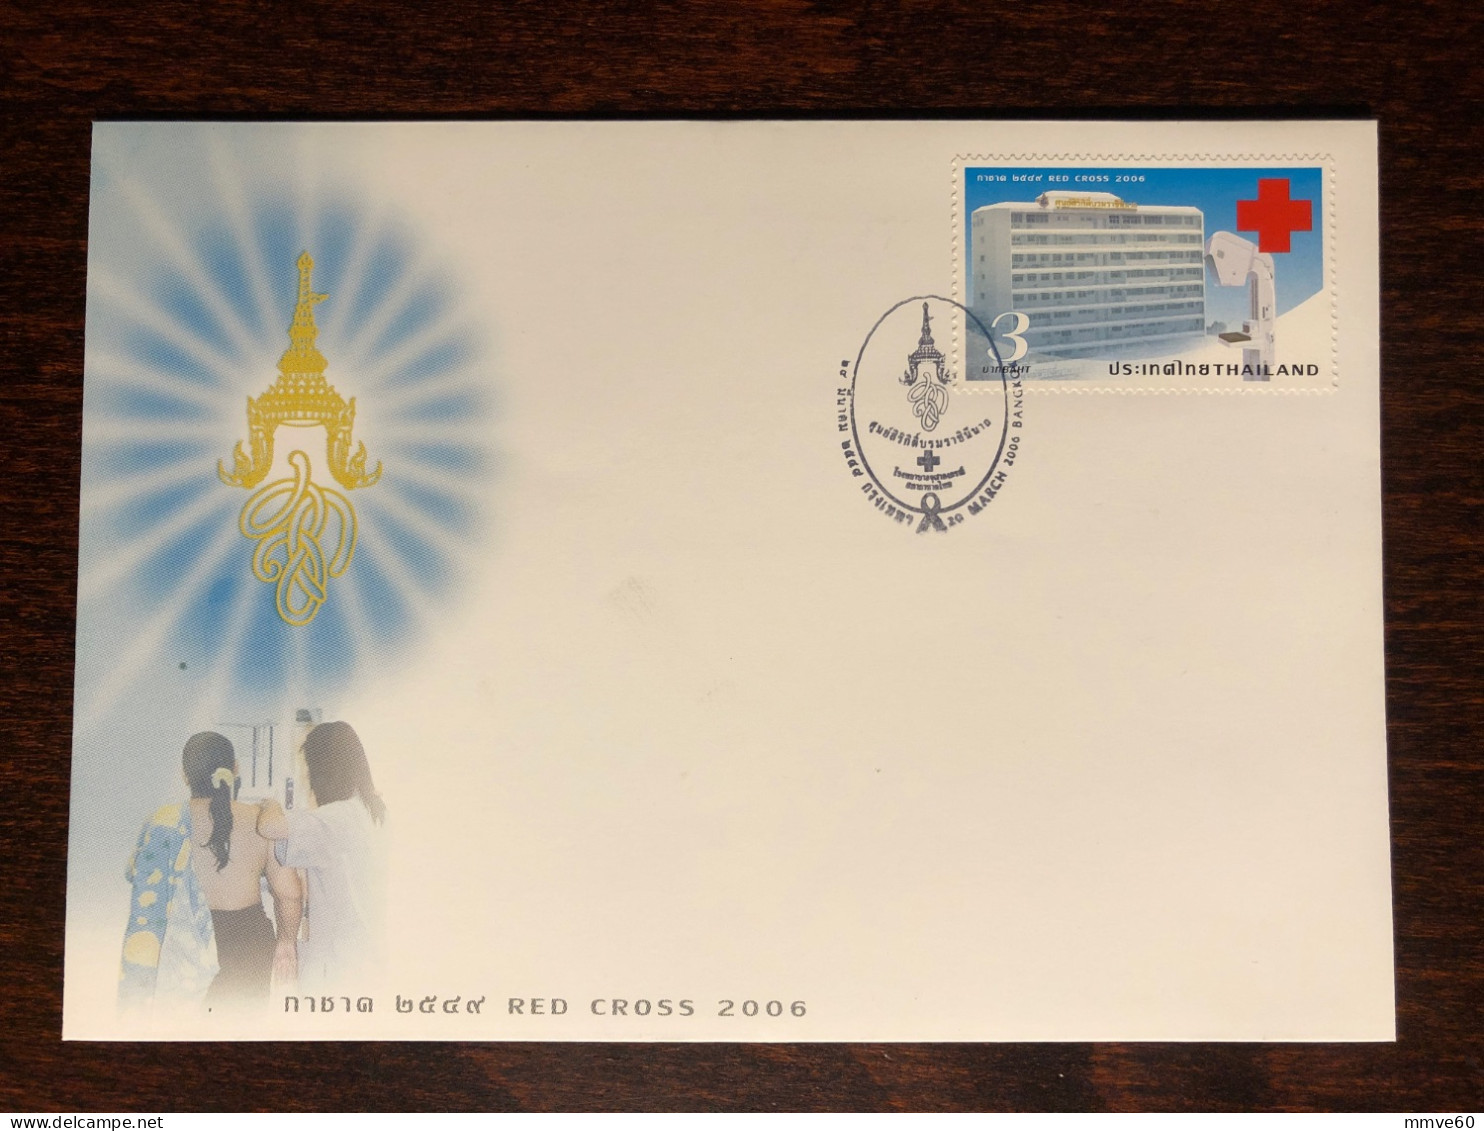 THAILAND FDC COVER 2006 YEAR BREAST CANCER RED CROSS HEALTH MEDICINE STAMPS - Thaïlande